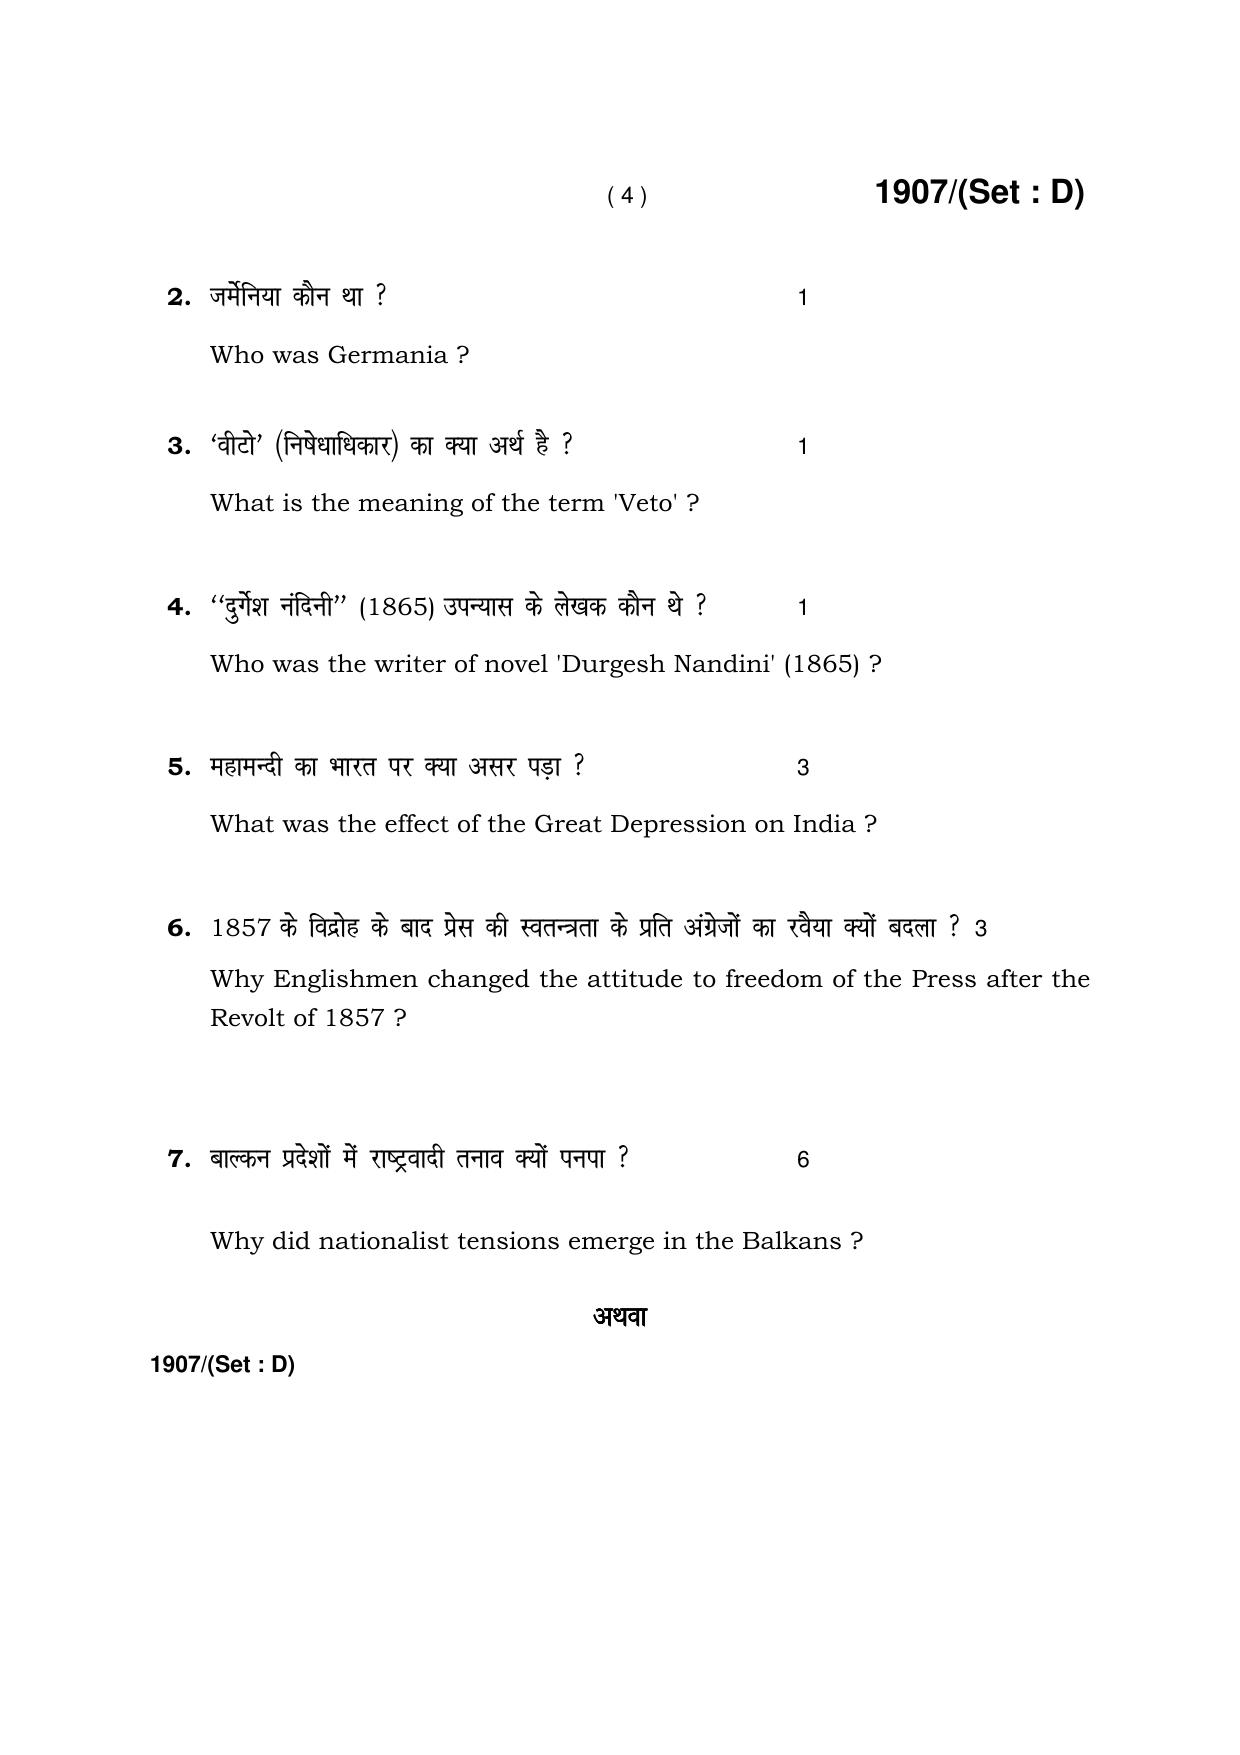 Haryana Board HBSE Class 10 Social Science -D 2017 Question Paper - Page 4